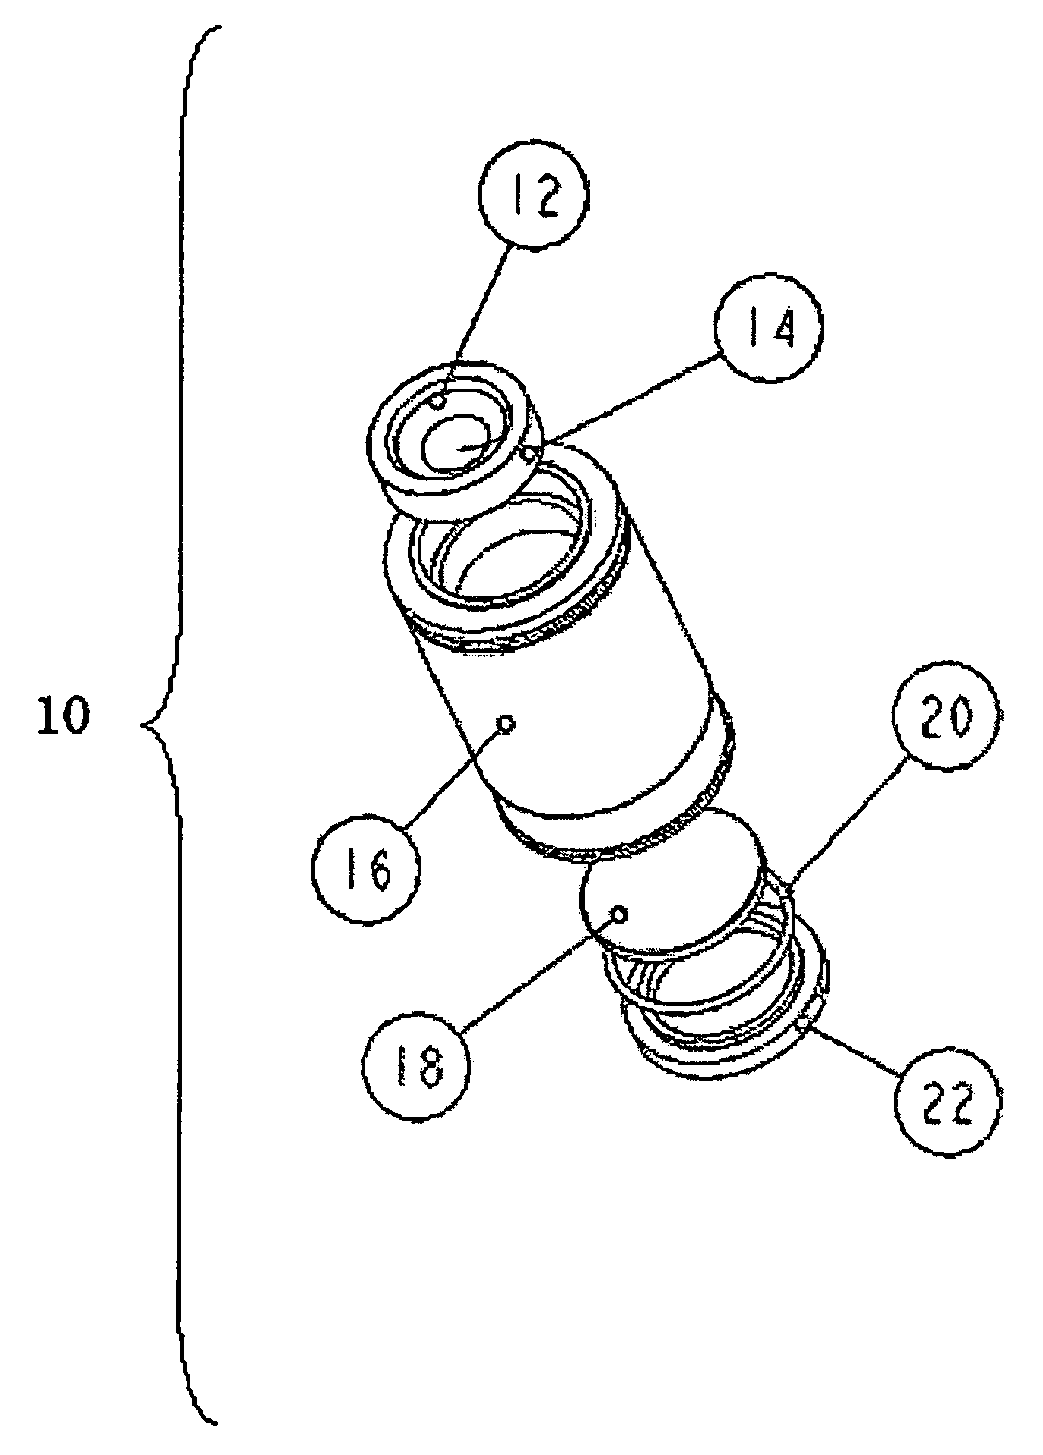 System and method for curing polymeric moldings